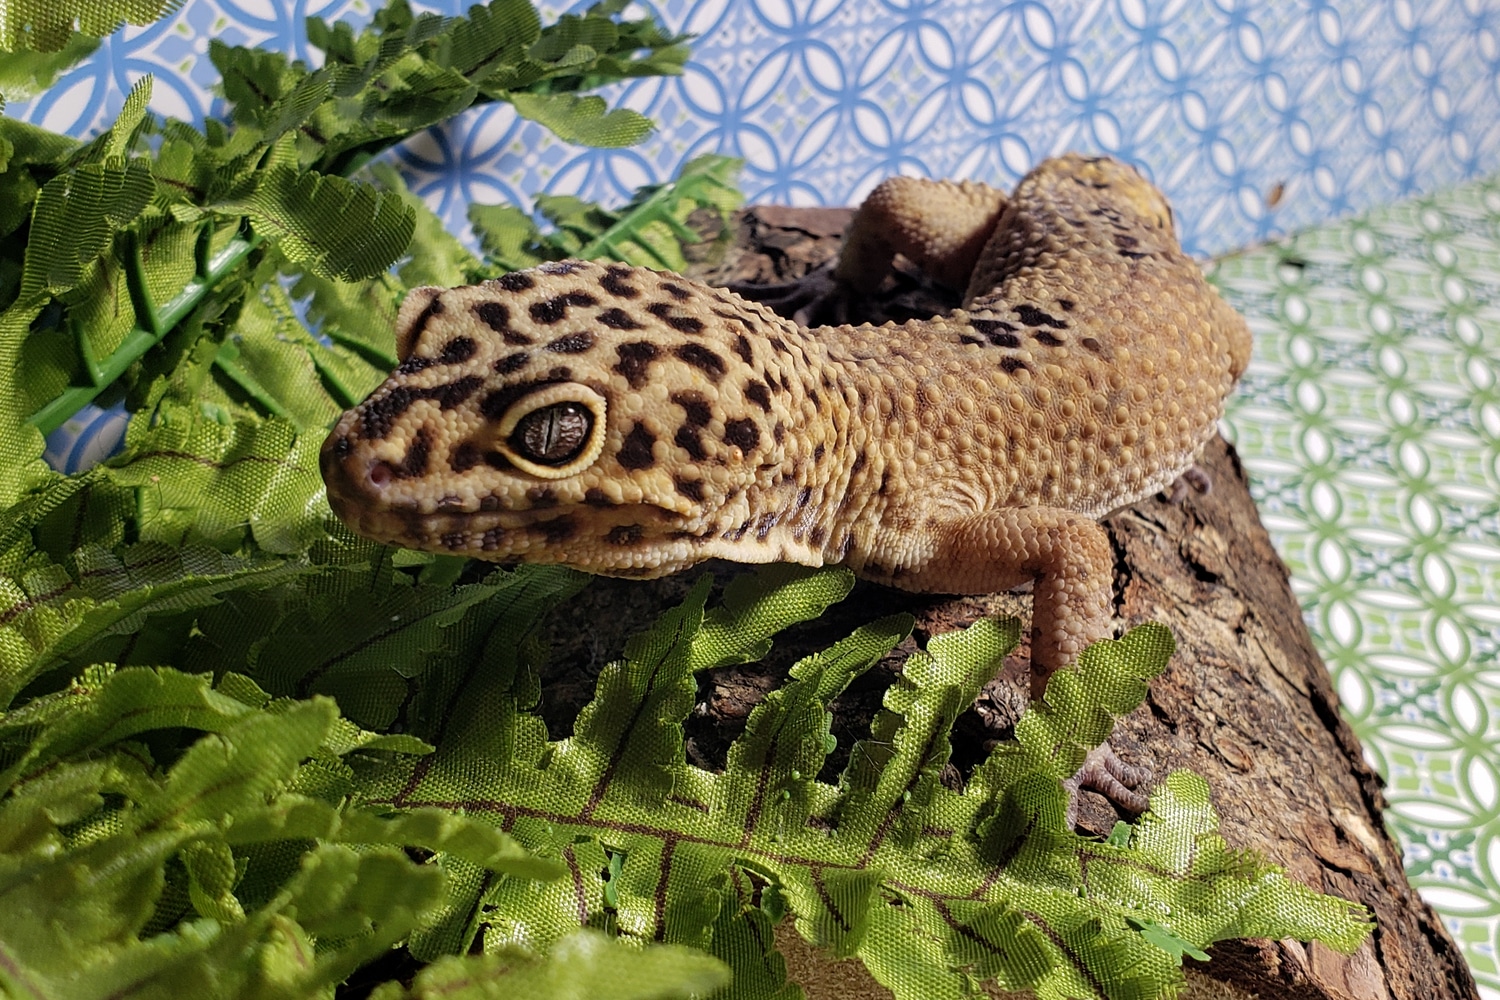 Giant Leopard Gecko by Derby City Reptiles